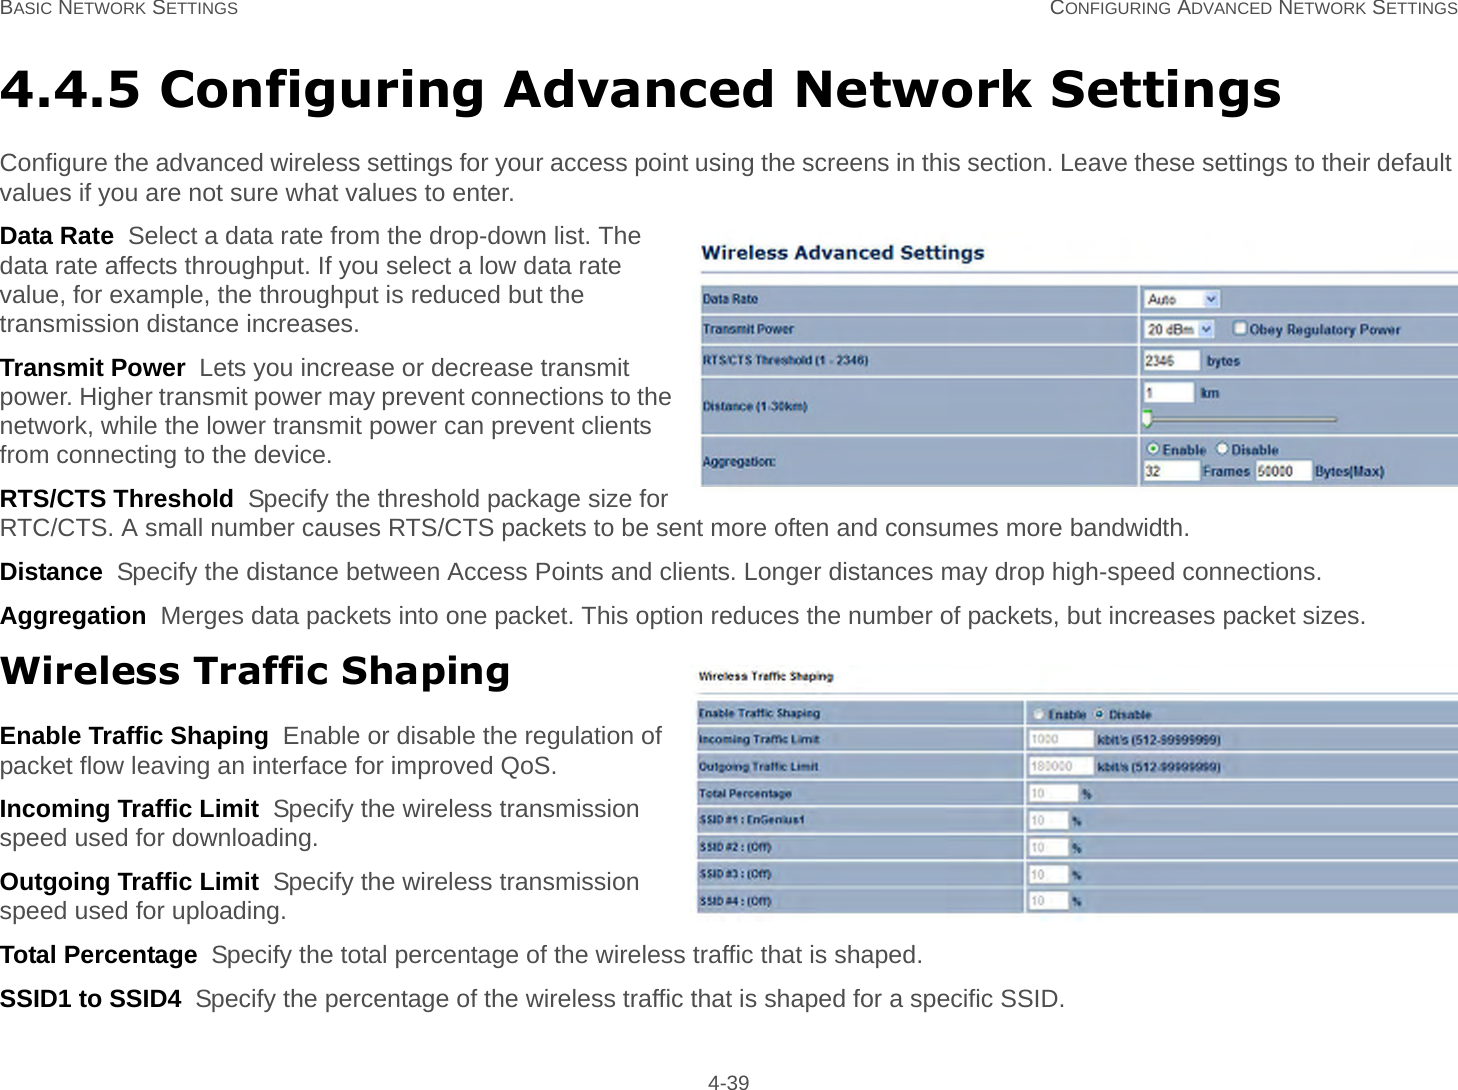 BASIC NETWORK SETTINGS CONFIGURING ADVANCED NETWORK SETTINGS 4-394.4.5 Configuring Advanced Network SettingsConfigure the advanced wireless settings for your access point using the screens in this section. Leave these settings to their default values if you are not sure what values to enter.Data Rate  Select a data rate from the drop-down list. The data rate affects throughput. If you select a low data rate value, for example, the throughput is reduced but the transmission distance increases.Transmit Power  Lets you increase or decrease transmit power. Higher transmit power may prevent connections to the network, while the lower transmit power can prevent clients from connecting to the device.RTS/CTS Threshold  Specify the threshold package size for RTC/CTS. A small number causes RTS/CTS packets to be sent more often and consumes more bandwidth.Distance  Specify the distance between Access Points and clients. Longer distances may drop high-speed connections.Aggregation  Merges data packets into one packet. This option reduces the number of packets, but increases packet sizes.Wireless Traffic ShapingEnable Traffic Shaping  Enable or disable the regulation of packet flow leaving an interface for improved QoS.Incoming Traffic Limit  Specify the wireless transmission speed used for downloading.Outgoing Traffic Limit  Specify the wireless transmission speed used for uploading.Total Percentage  Specify the total percentage of the wireless traffic that is shaped.SSID1 to SSID4  Specify the percentage of the wireless traffic that is shaped for a specific SSID.